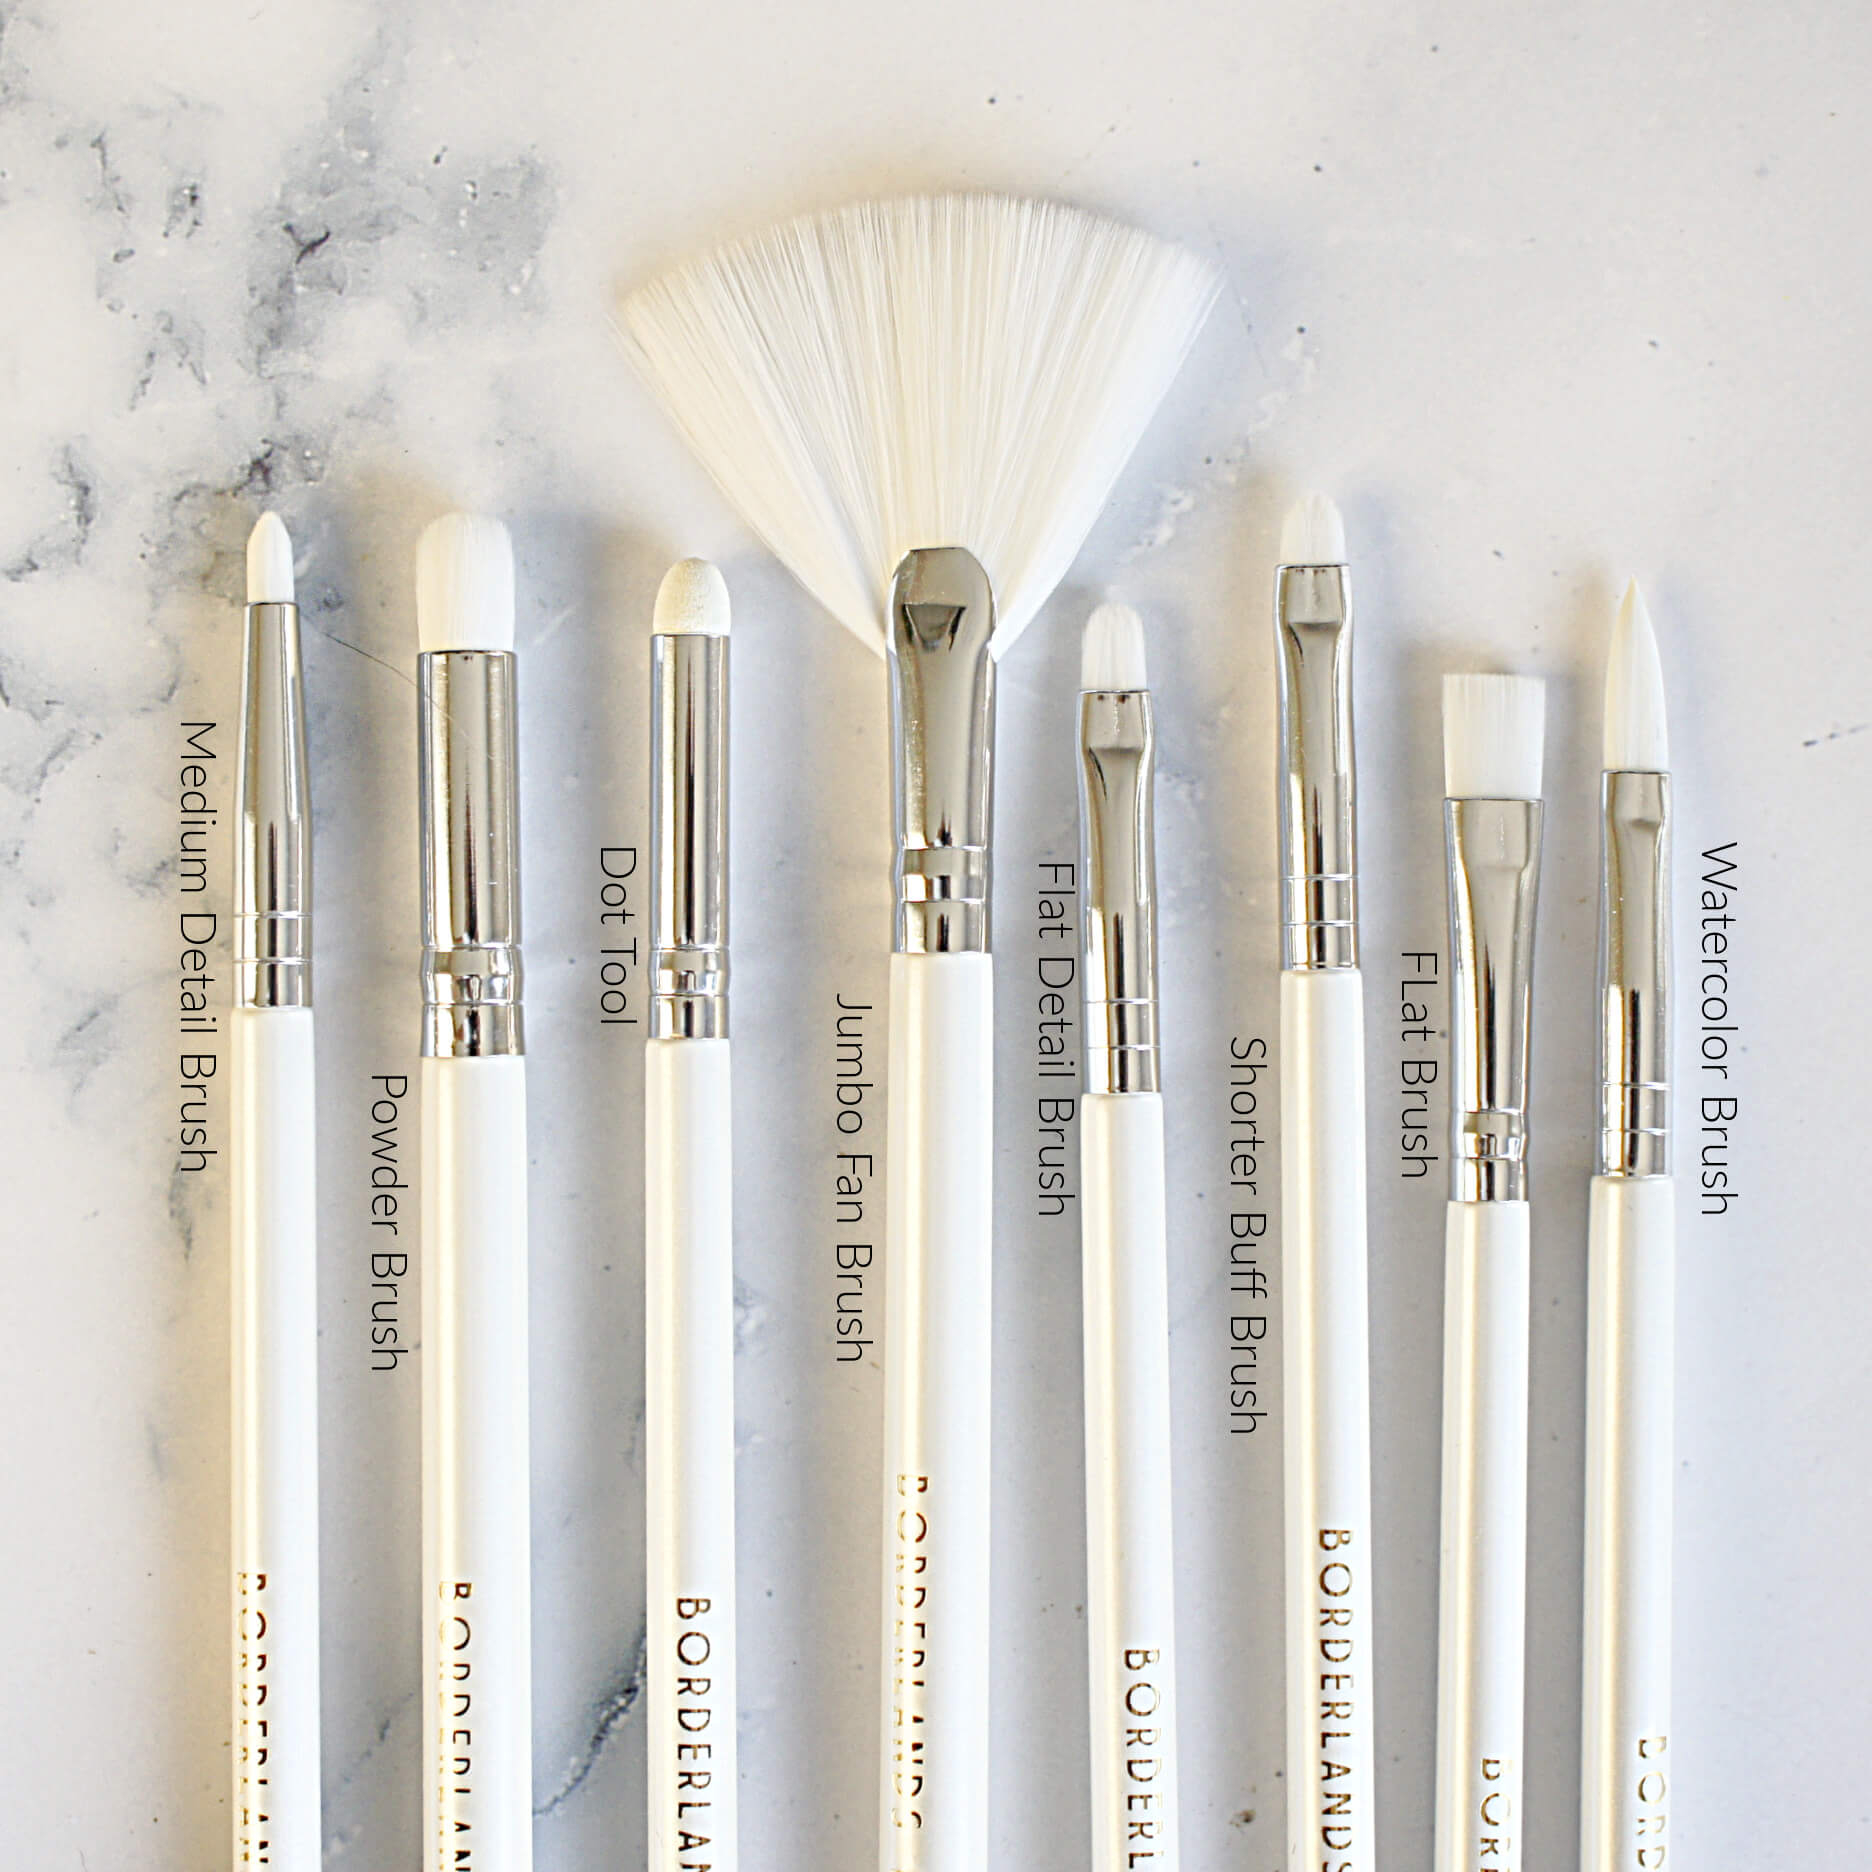 Food Safe Paint Brushes for Decorating Cookies, Cakes, Fondant, Macarons  from Borderlands Bakery